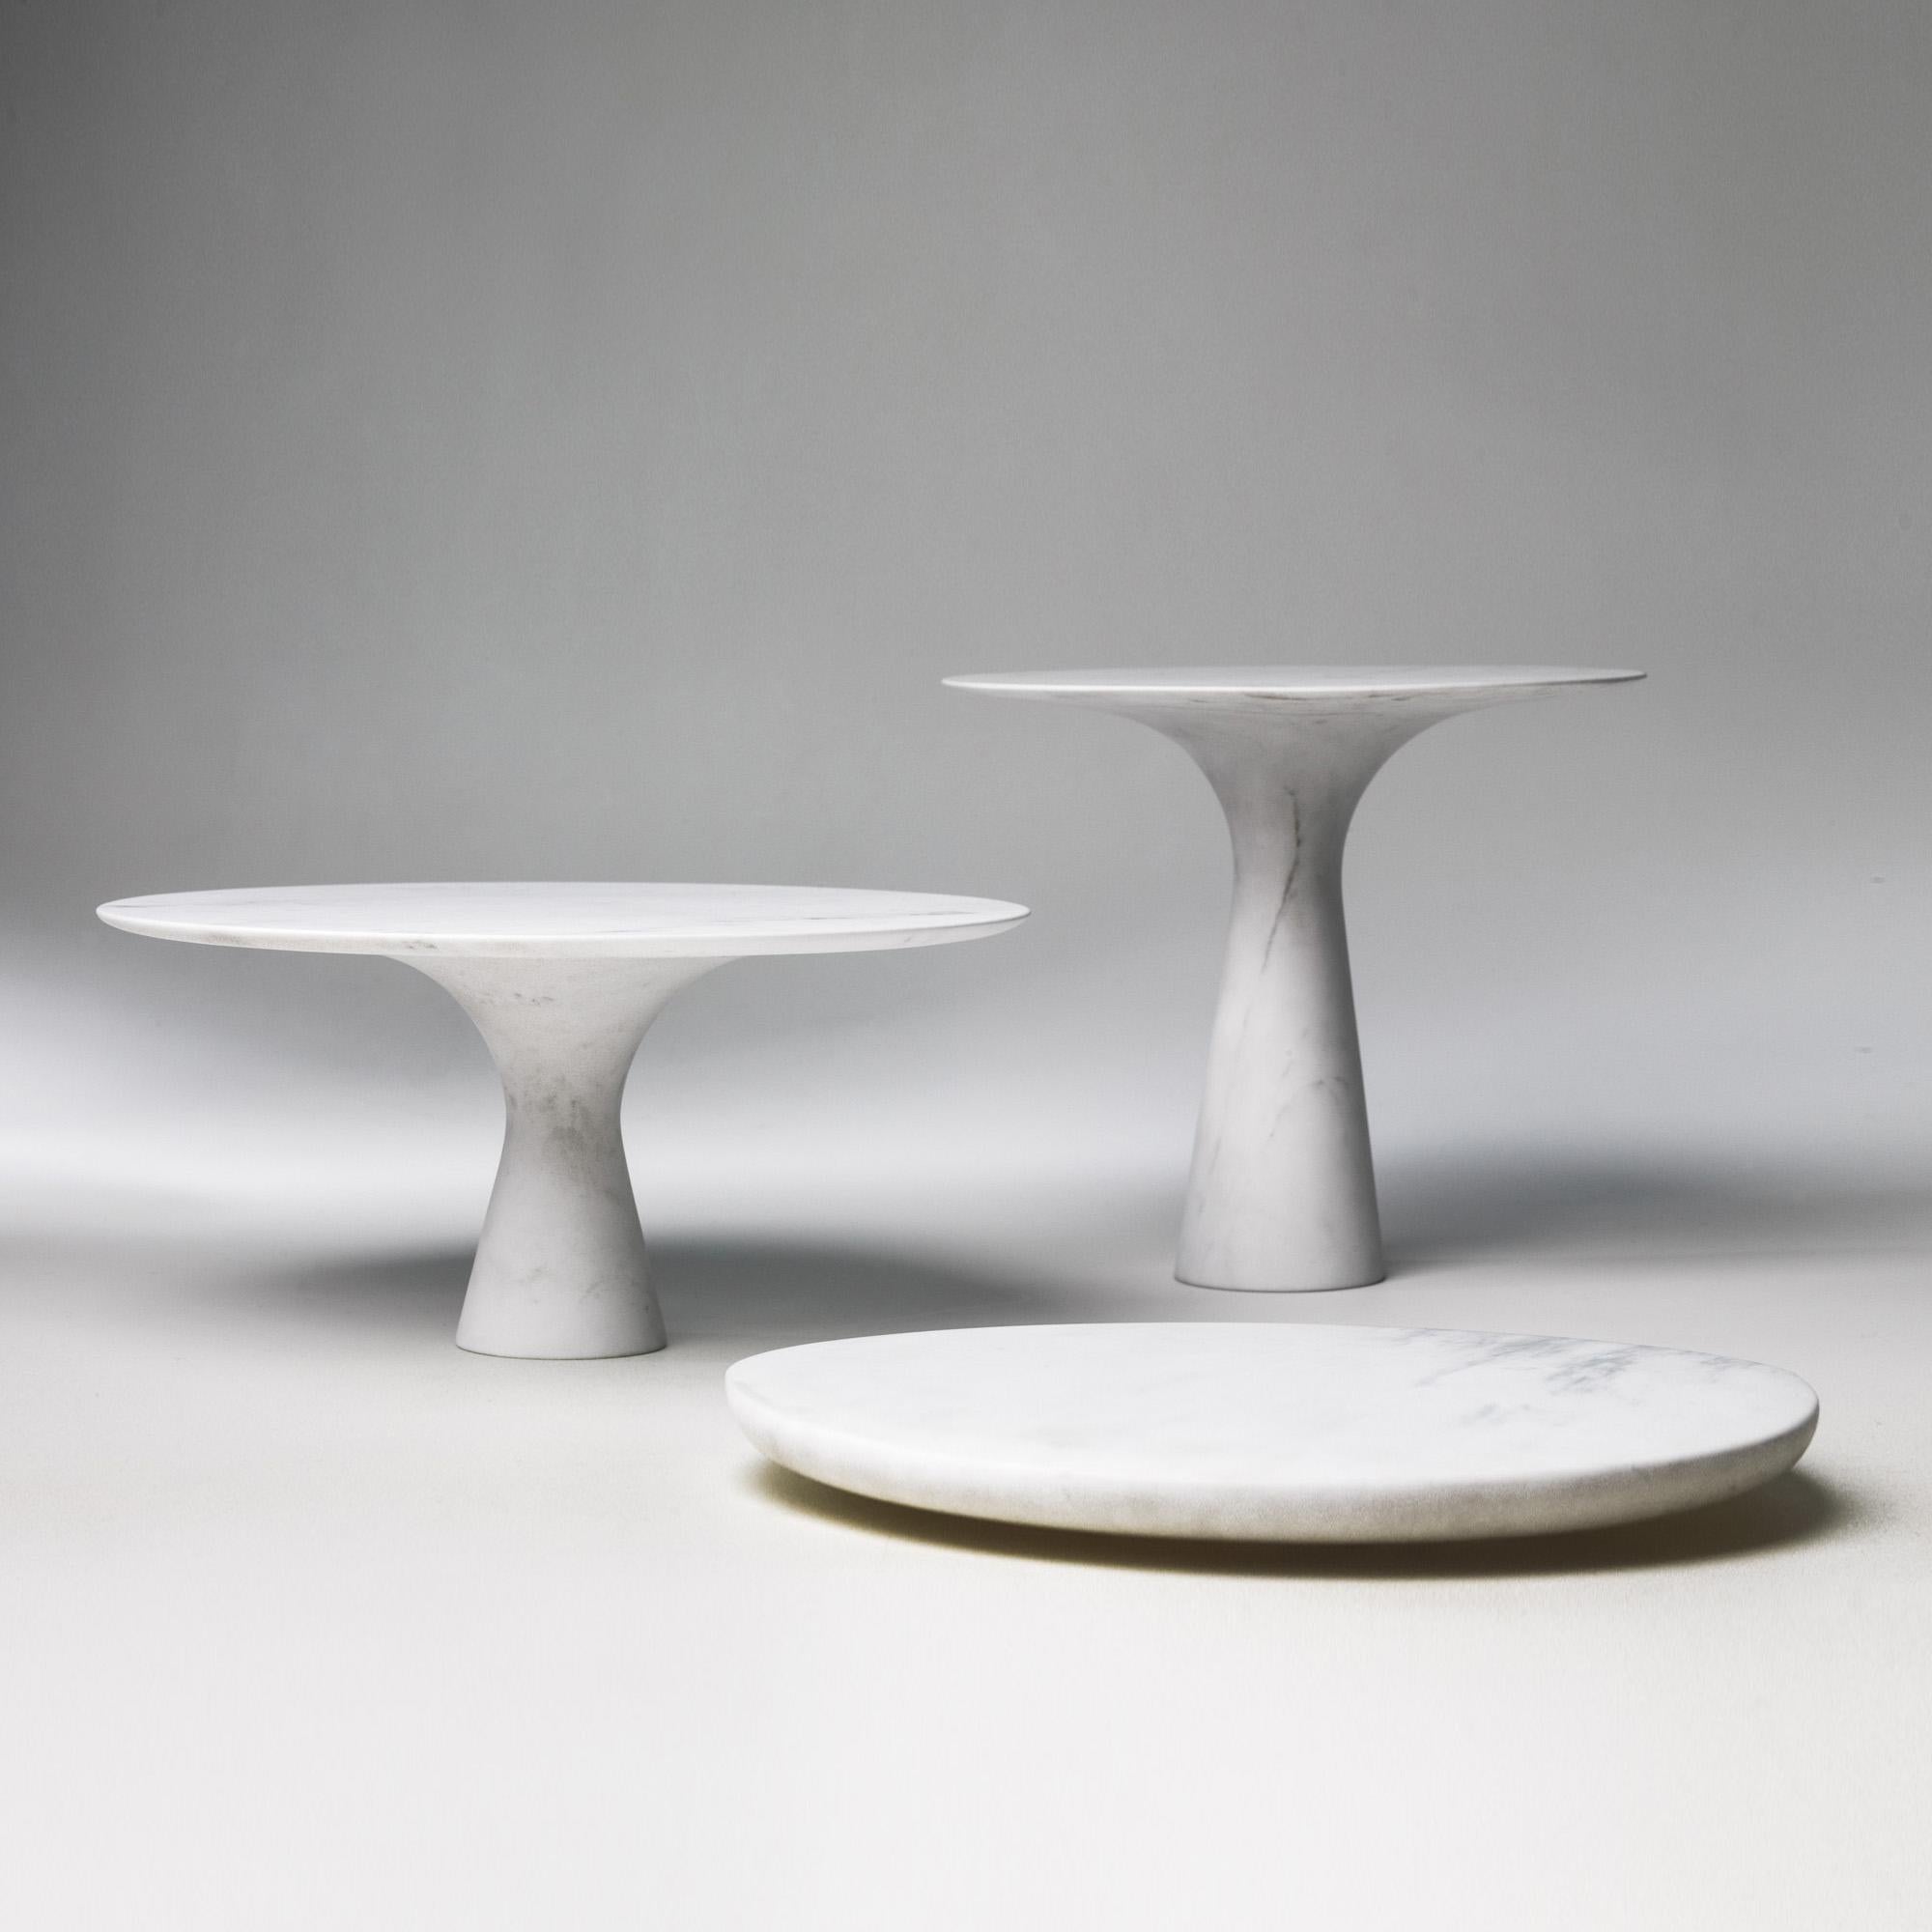 Set of 3 Refined Contemporary Marble Kynos Cake Stands and Plate
Signed by Leo Aerts.
Dimensions: 
D 26 x H 22.5 cm 
D 32 x H 15 cm
D 32 x H 2 cm
Material: Kynos marble
Technique: Polished, carved. 

Available in marble: kyknos, bianco statuarietto,